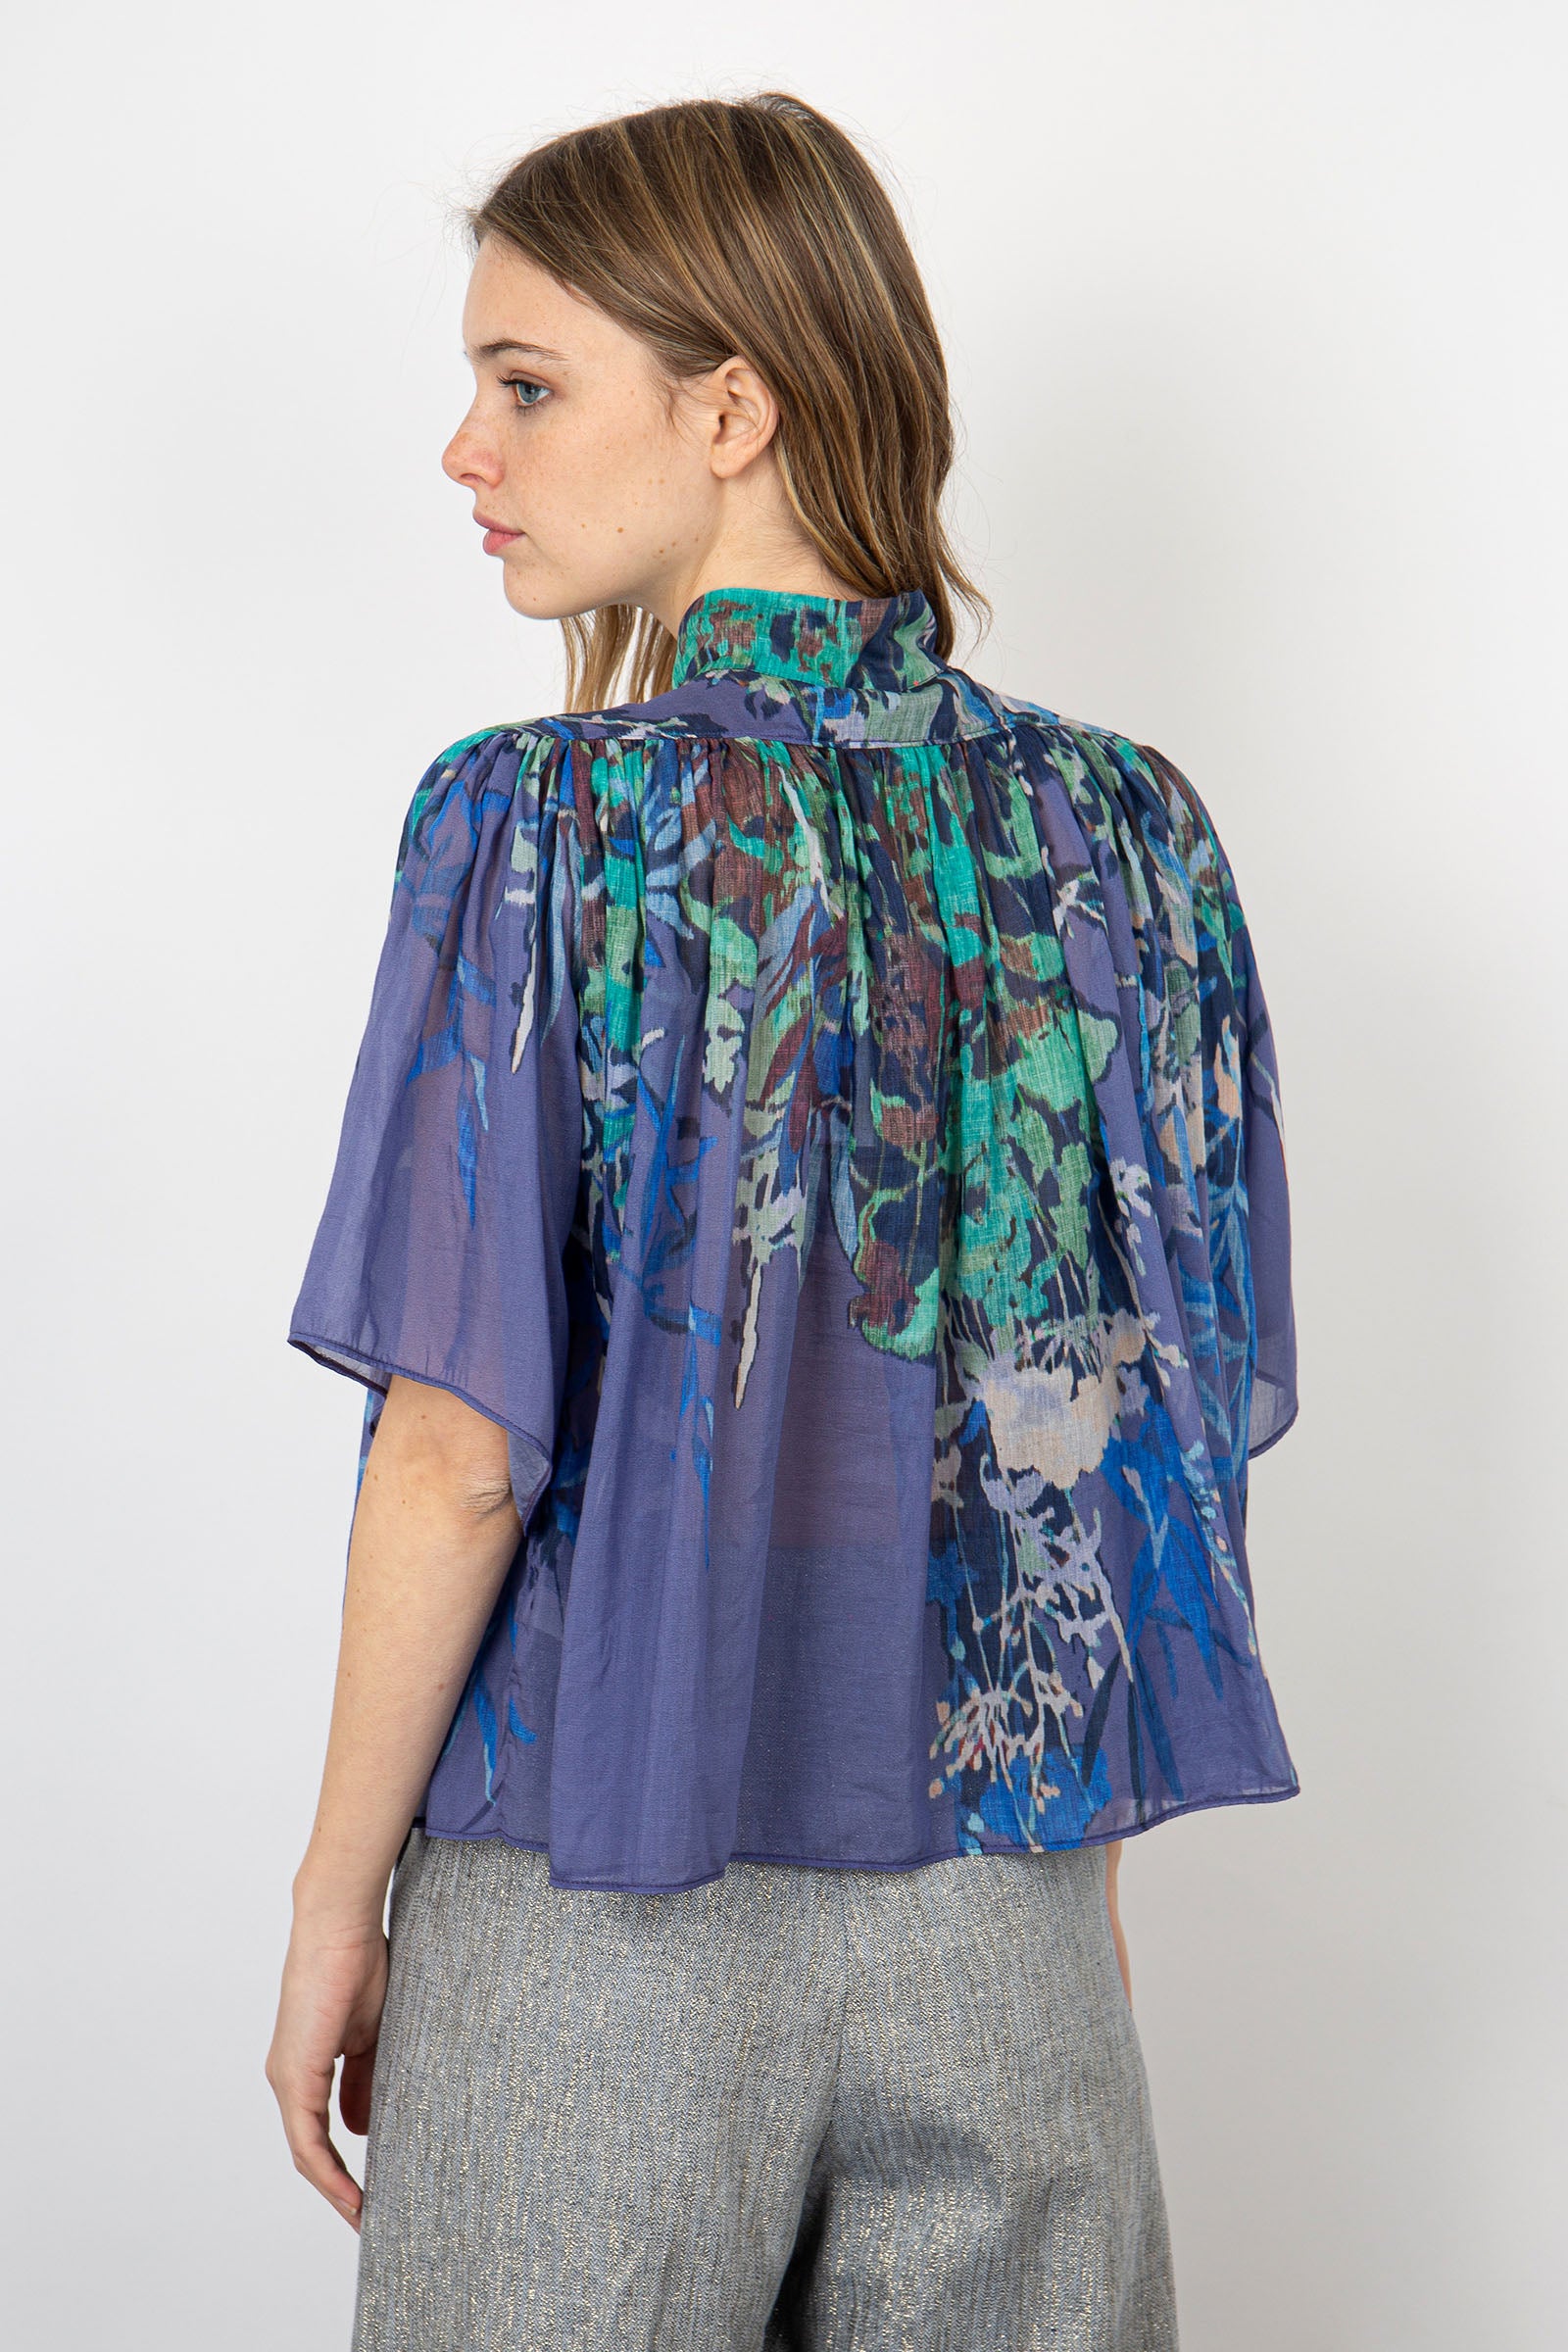 Forte Forte Cotton Voile Shirt in Purple with Print - 4